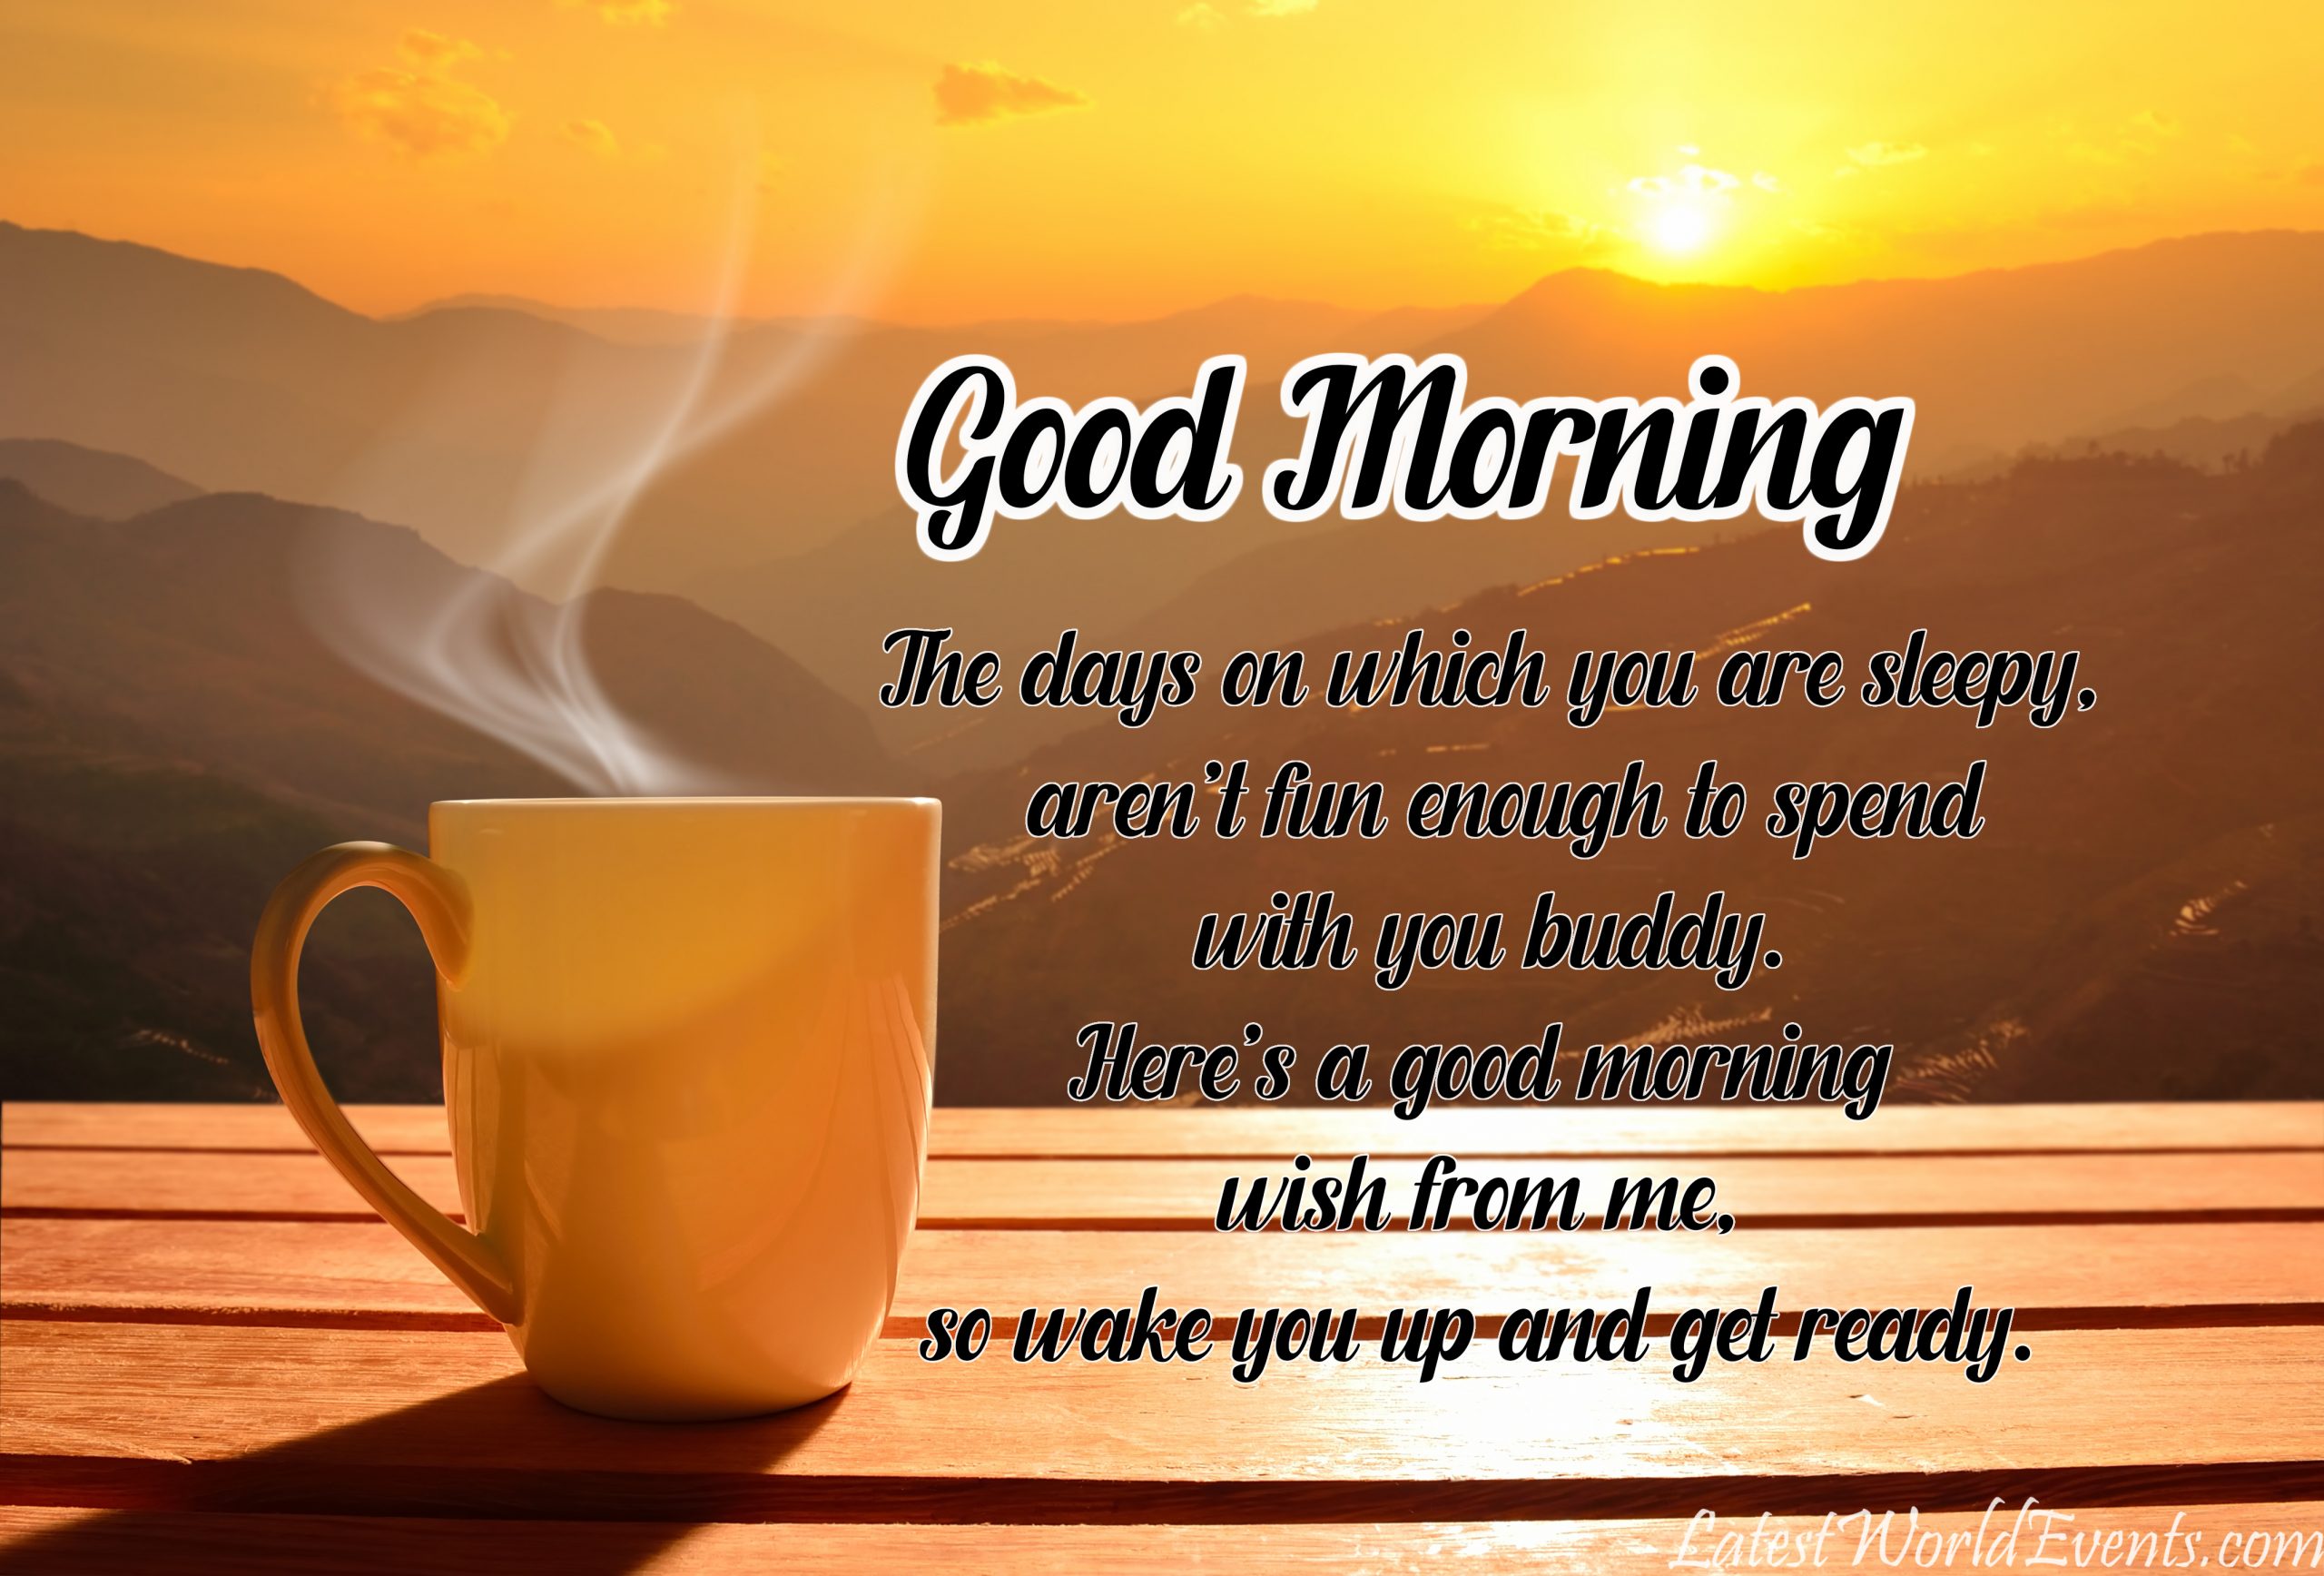 Download-good-morning-wishes-quotes